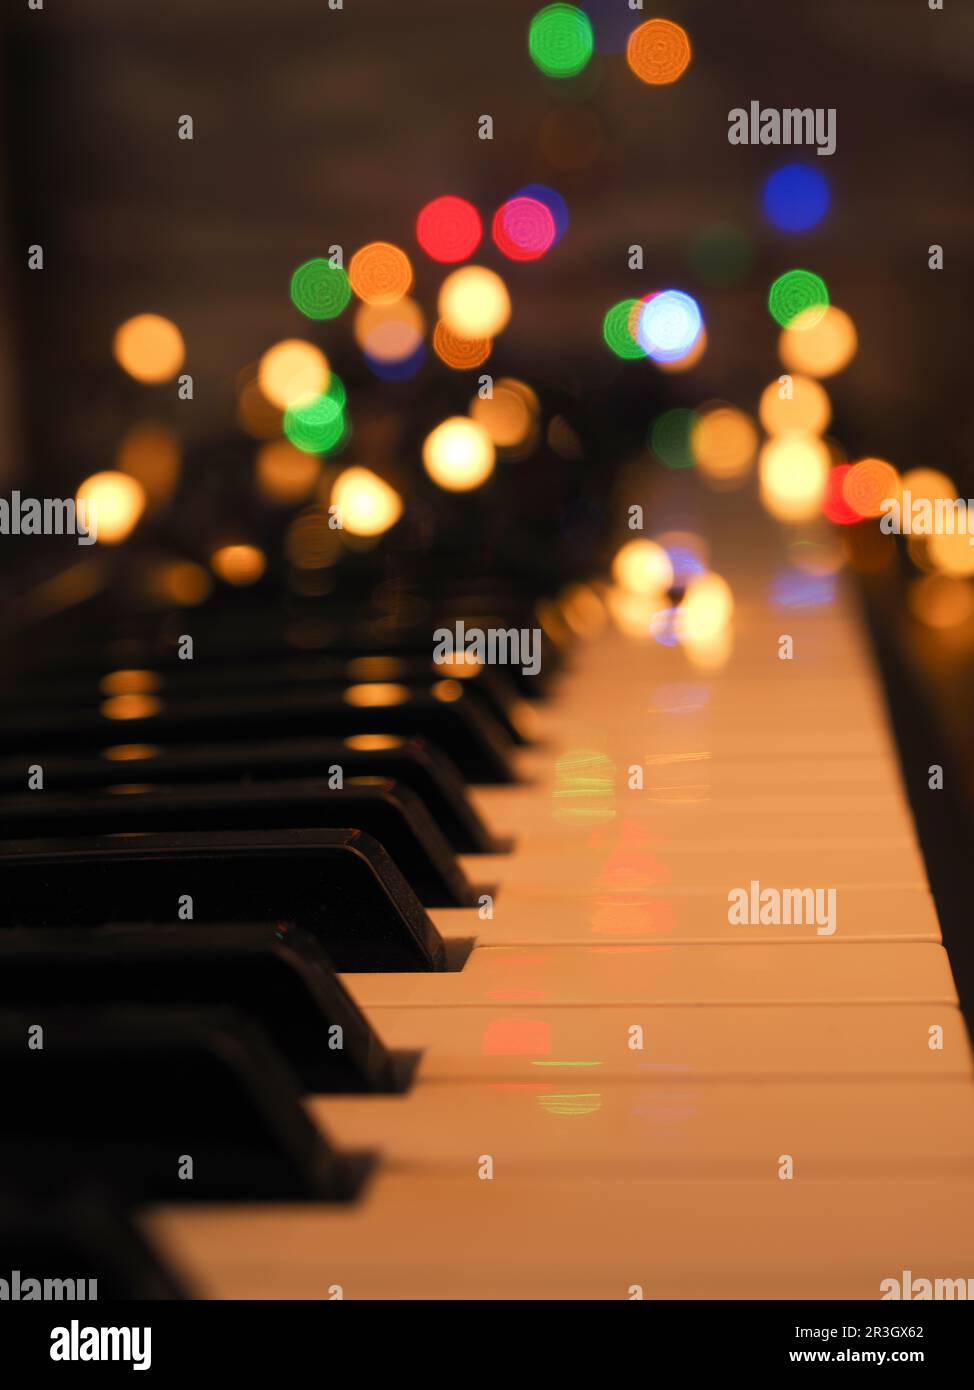 Piano keyboard with fairy lights and colorful blurred Christmas lights, seasonal background Stock Photo